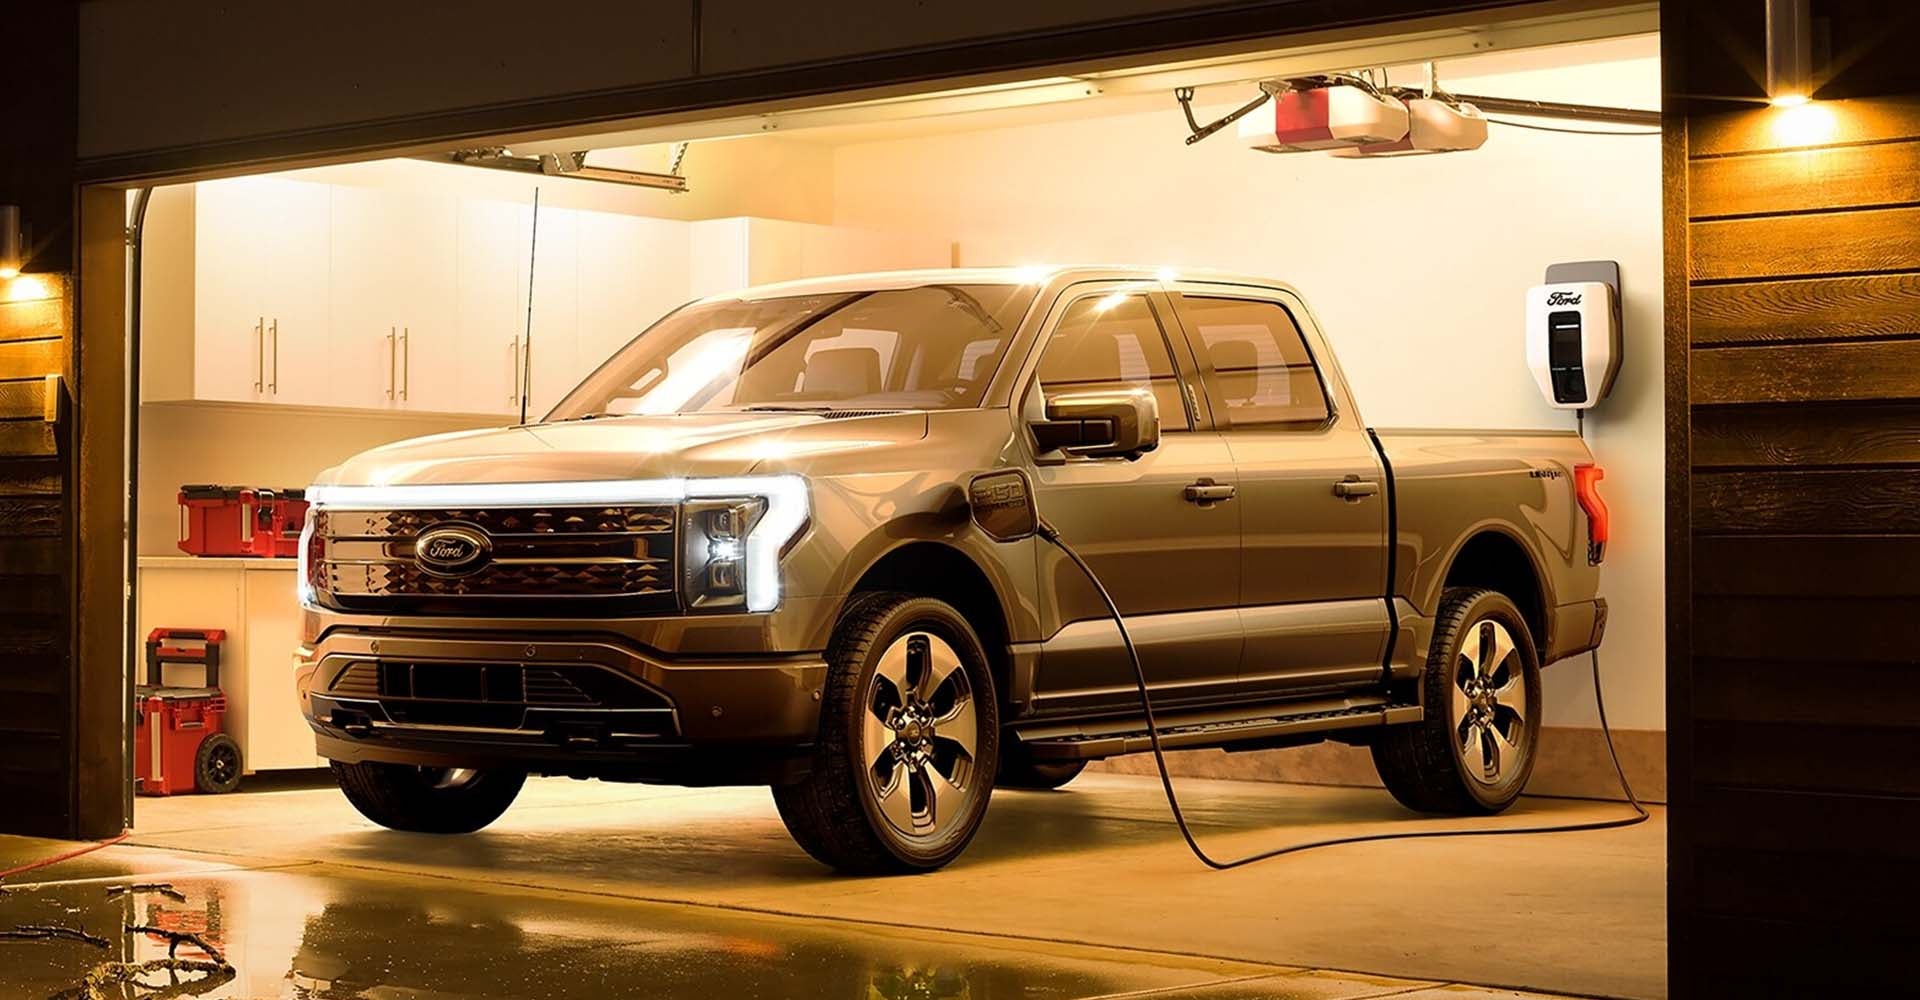 2022 Ford F-150 Lightning towing capacity